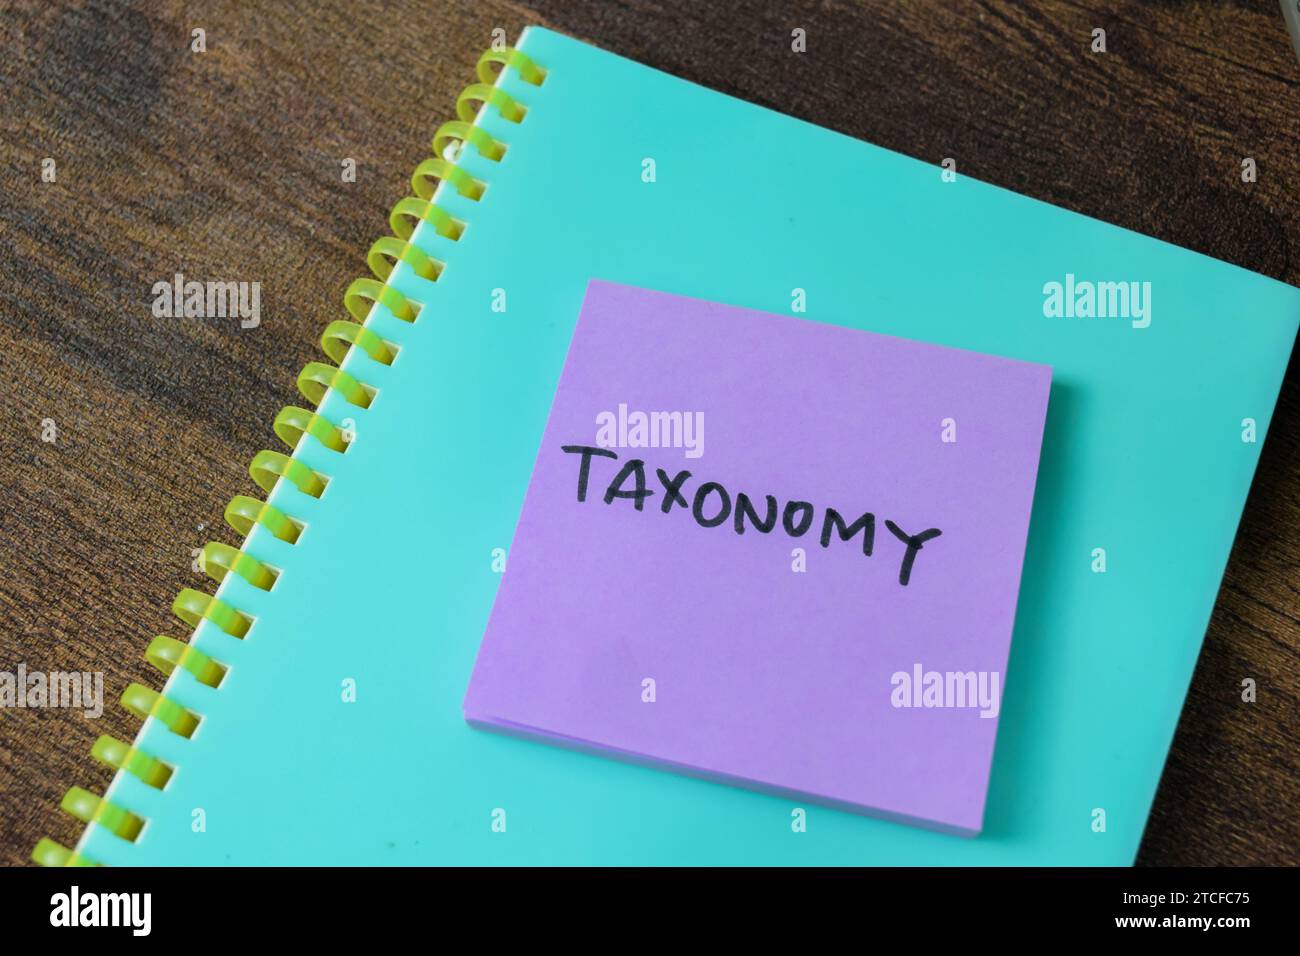 Concept of Taxonomy write on sticky notes isolated on white background. Stock Photo